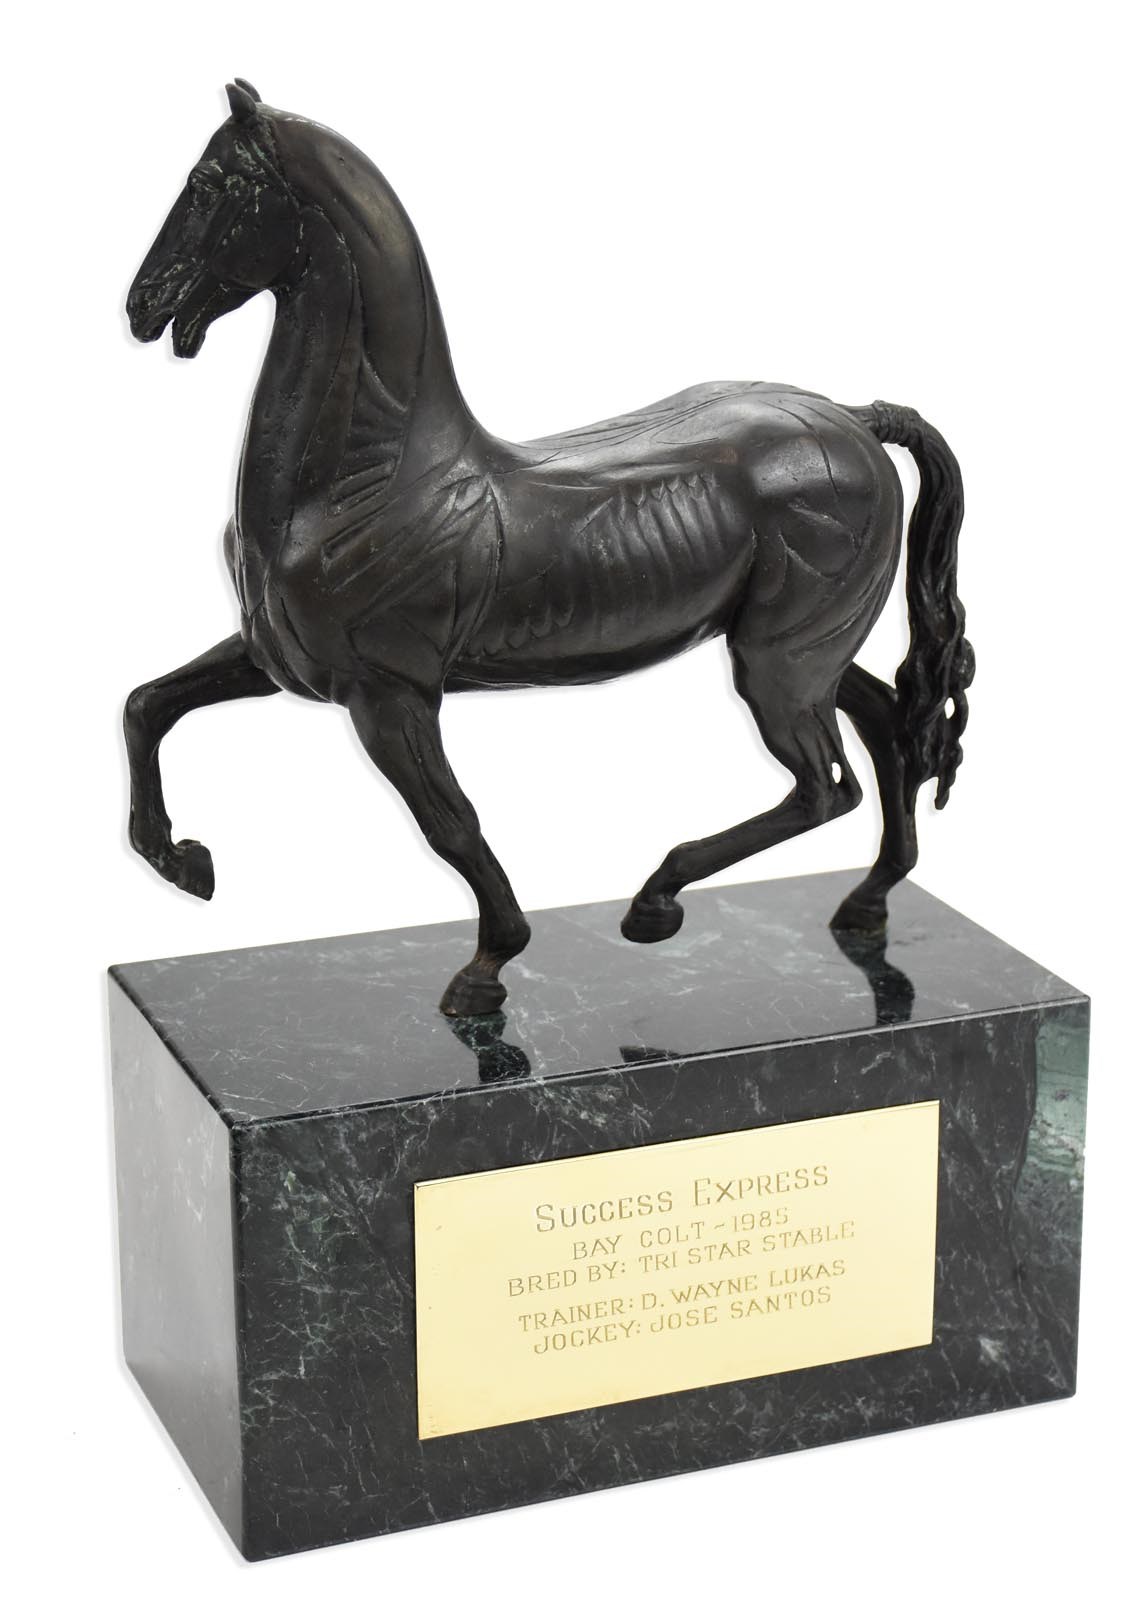 1987 Breeders' Cup Juvenile Owner's Trophy - Won by Success Express